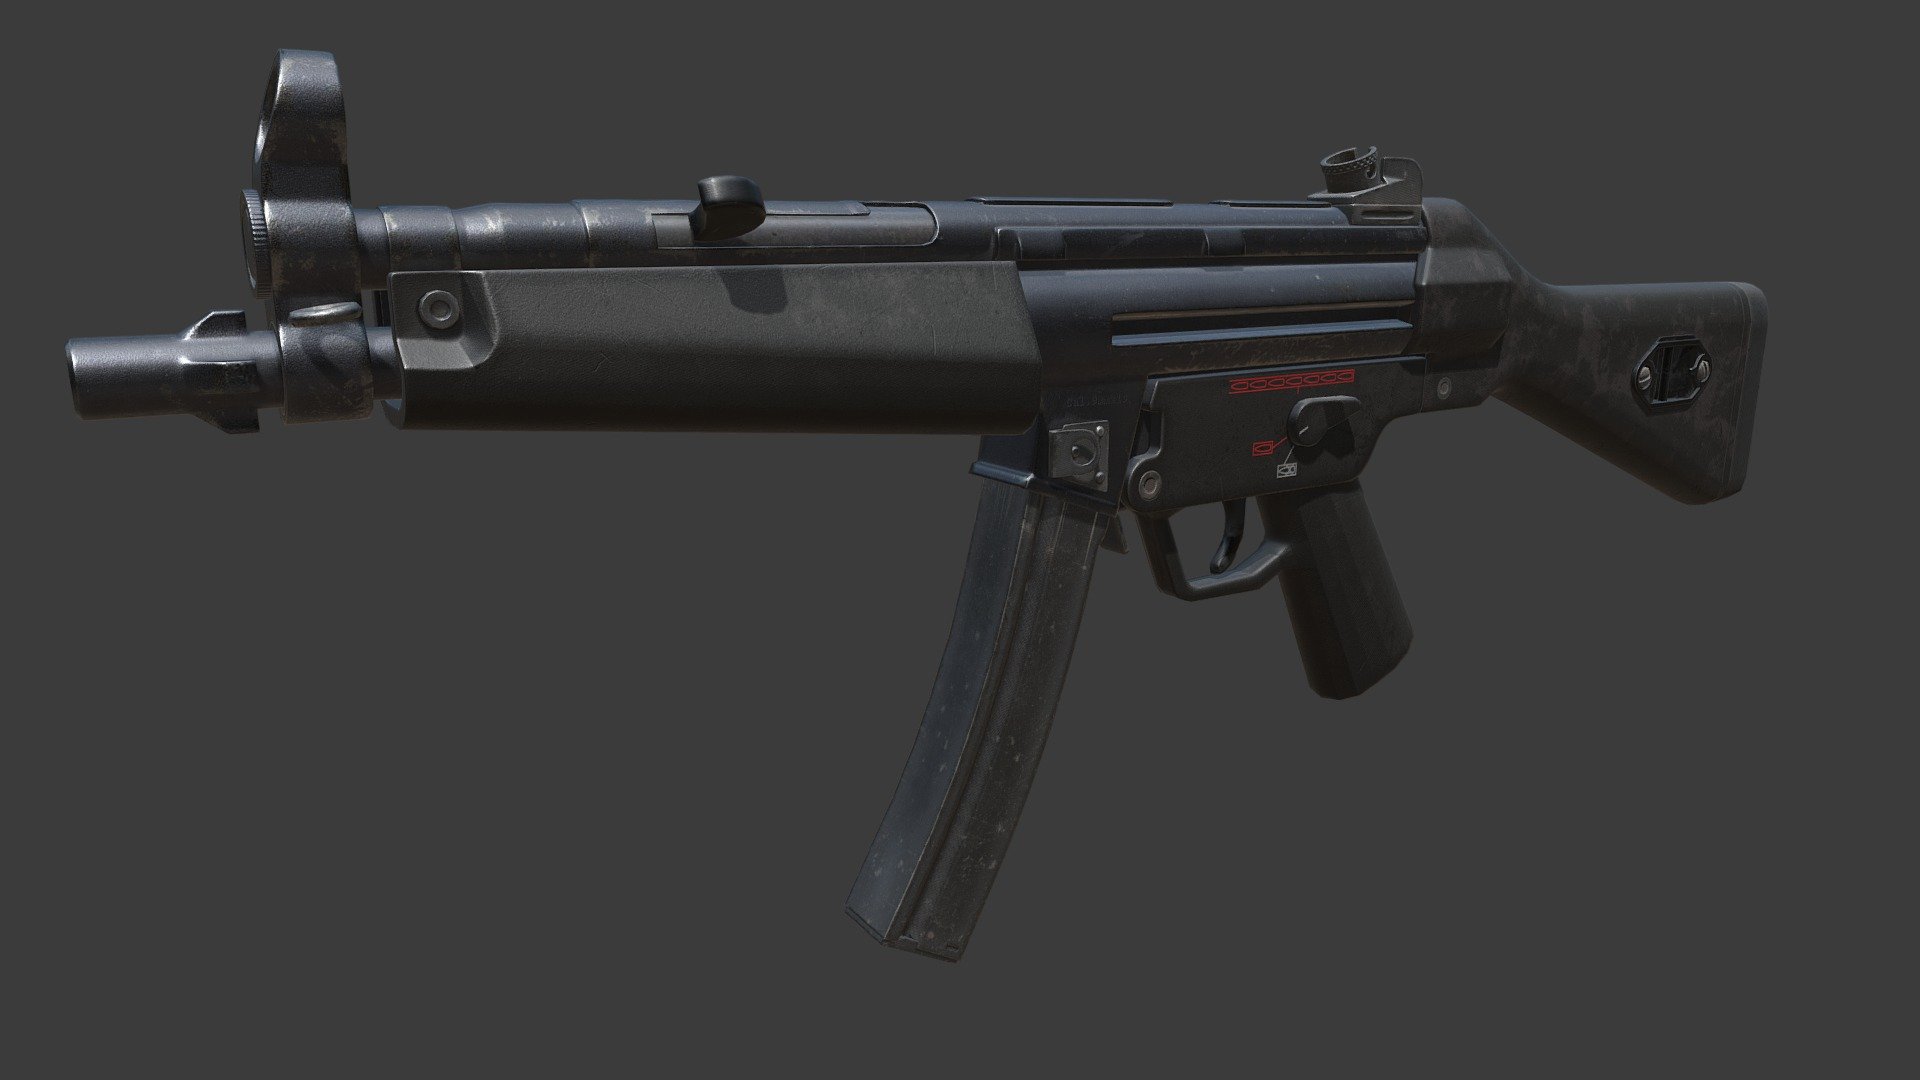 Model of H&amp;K MP5A3 submachine gun
Low-poly, game-ready asset
High-quality textures - H&K MP5A3 - 3D model by Mykhailo (@aggo) 3d model